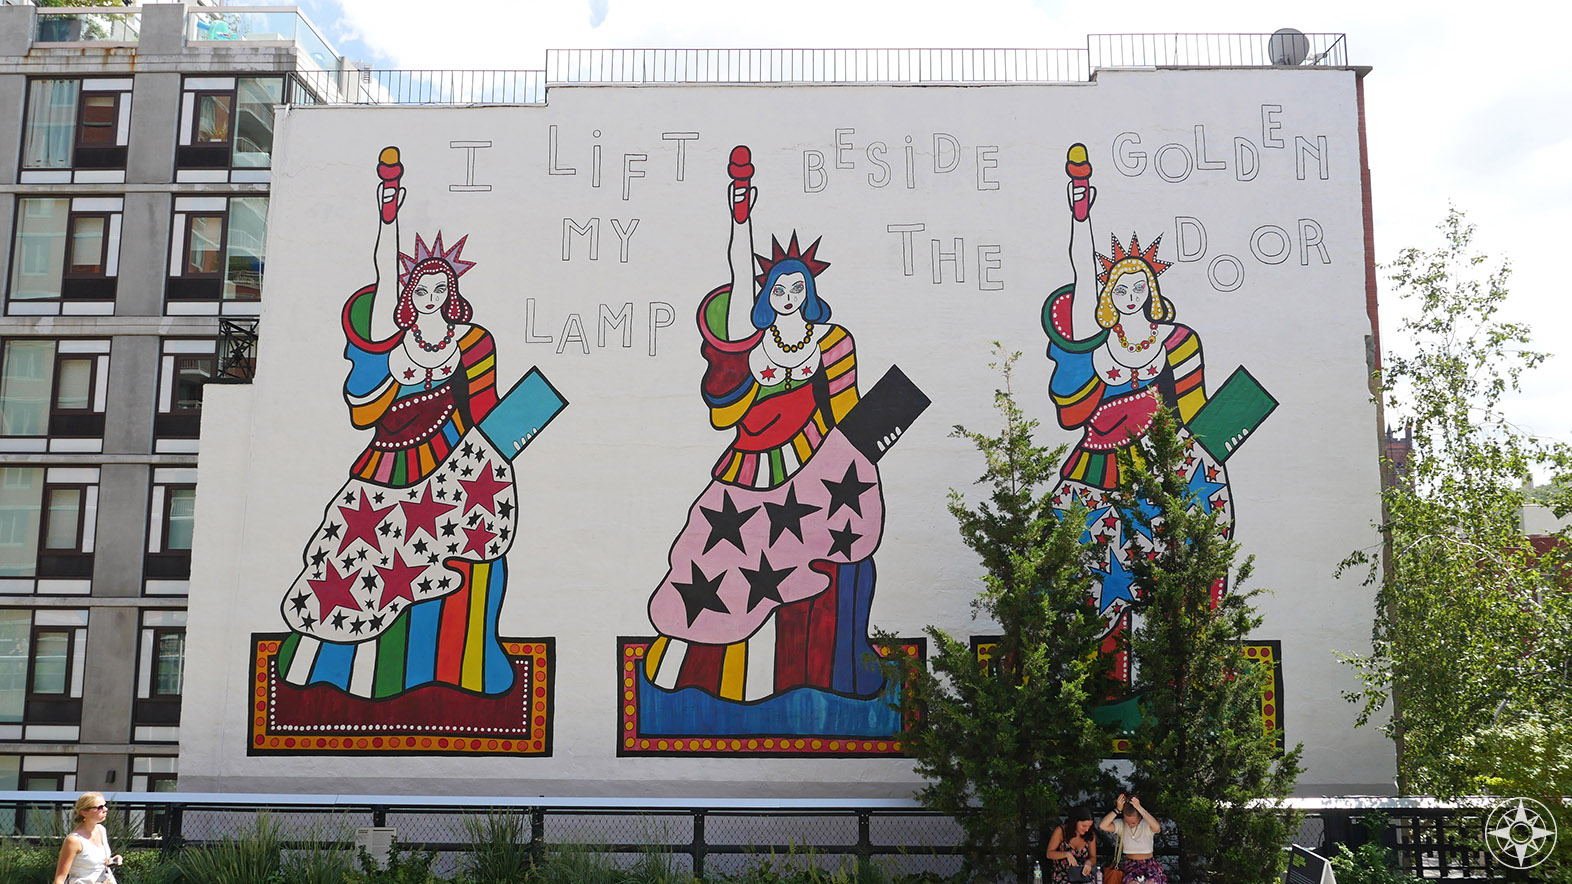 "I Lift My Lamp Beside the Golden Door" Mural by Berlin-based artist Dorothy Iannone - at 22nd Street.